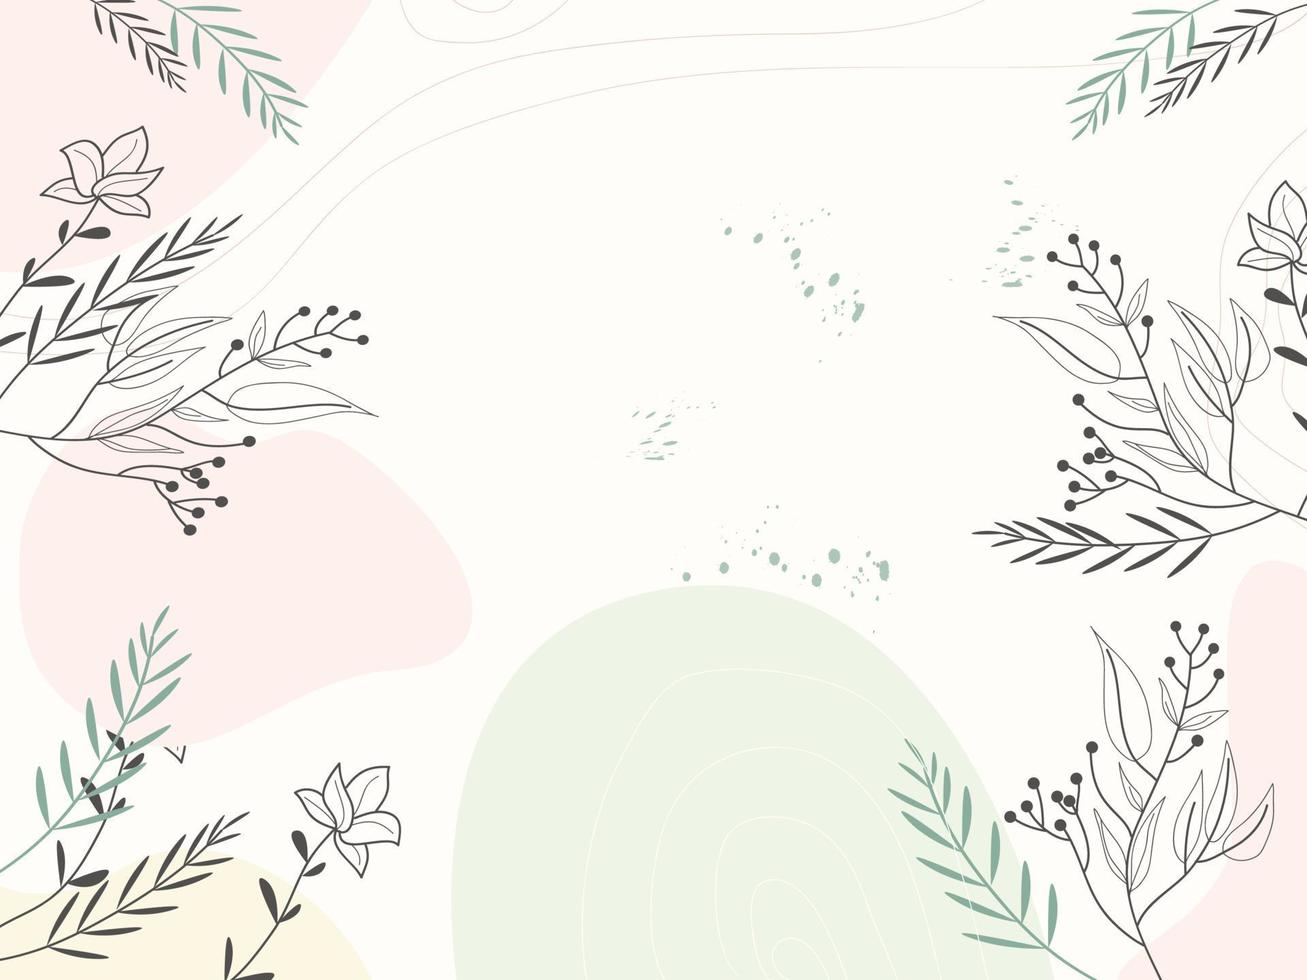 HANDRAWN FLORAL BACKGROUND vector